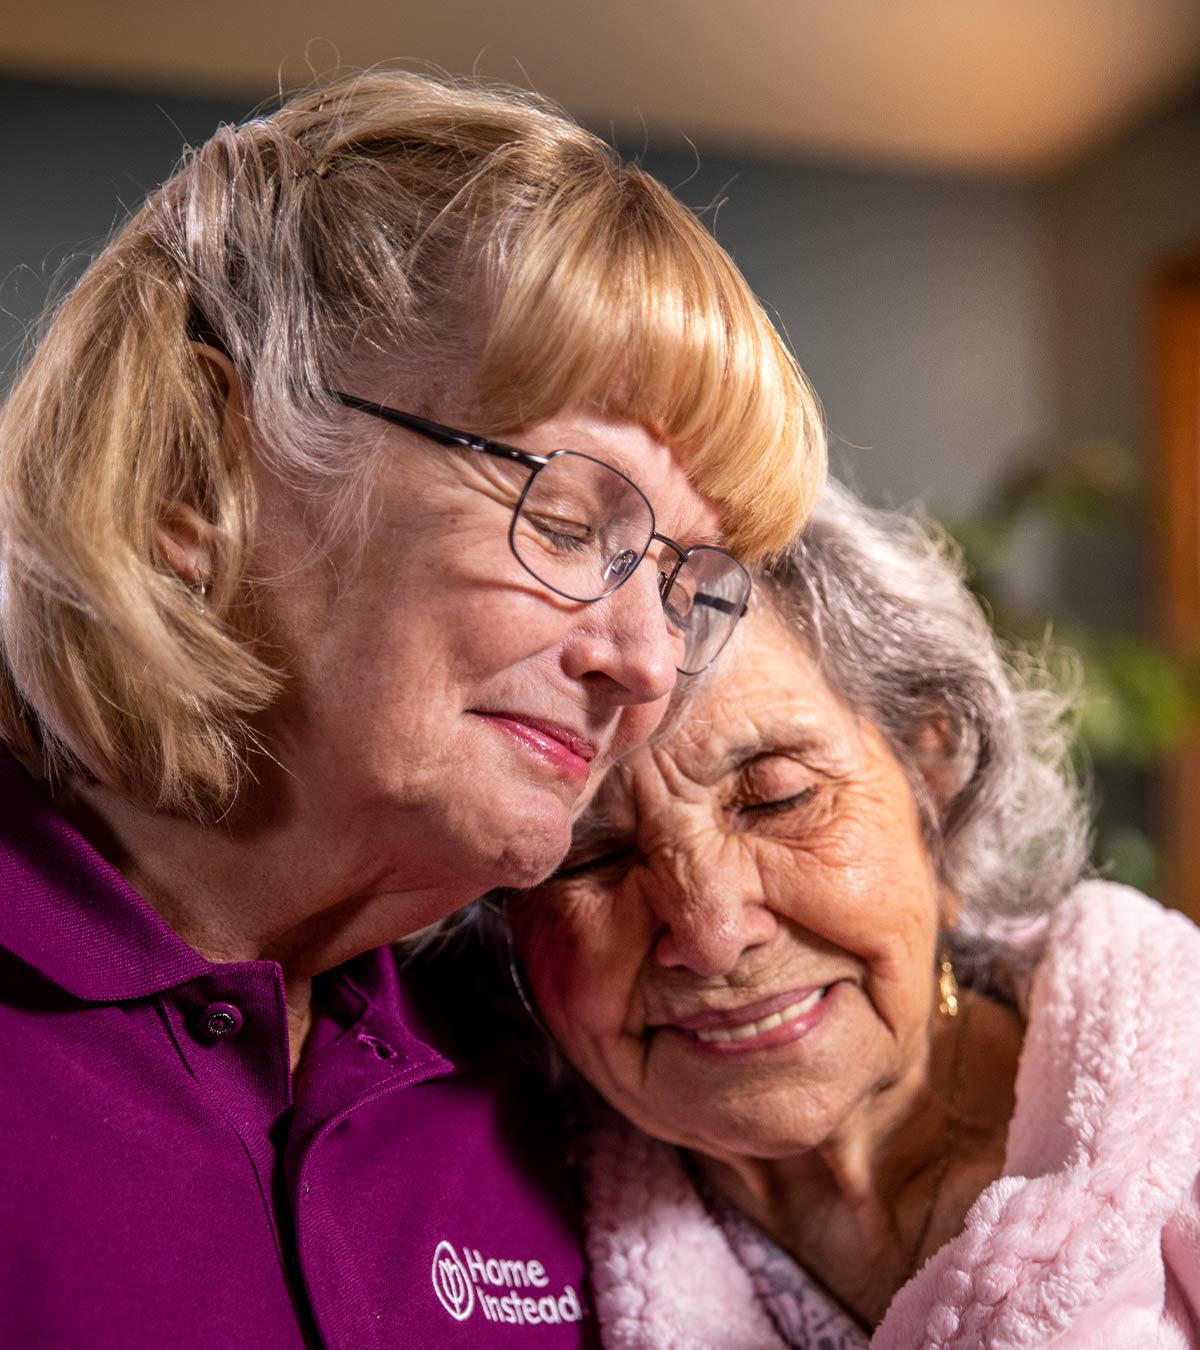 CAREGiver providing in-home senior care services. Home Instead of Clarksville, TN provides Elder Care to aging adults. 